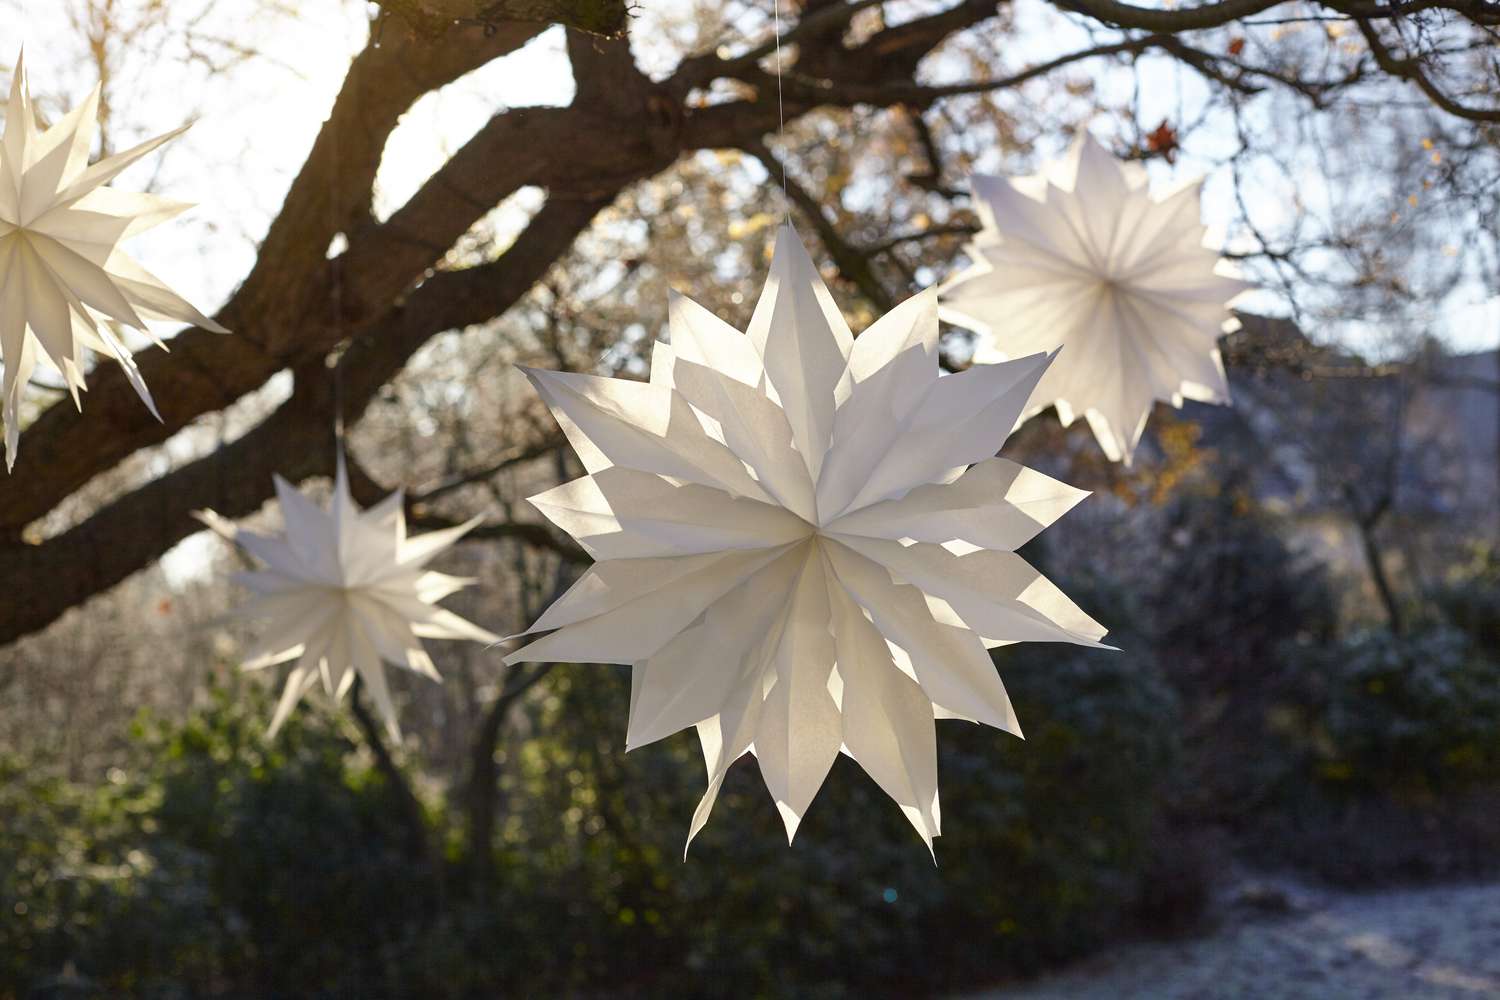 White handmade paper stars hanging from sunlit tree branches